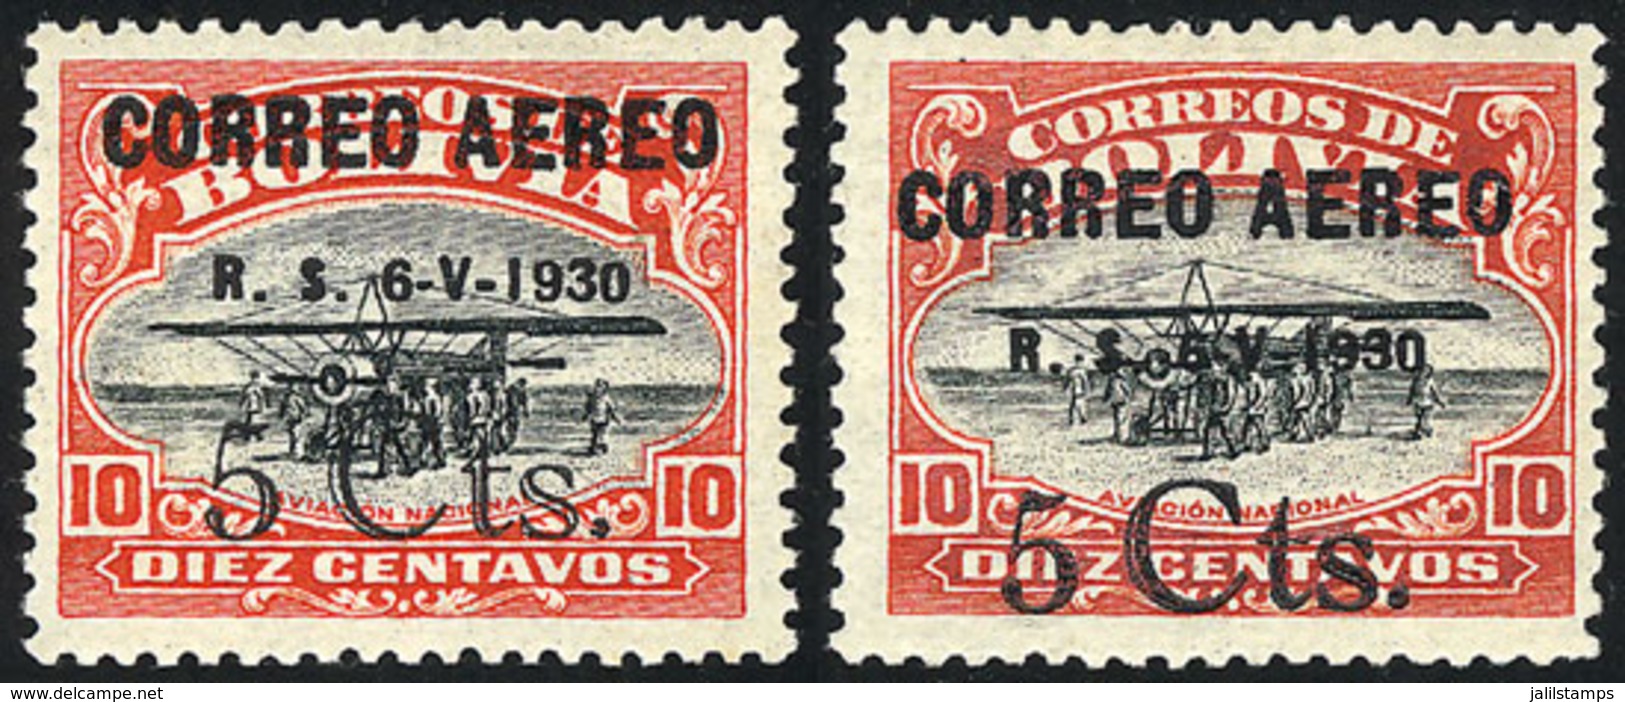 807 BOLIVIA: Sc.C11, 2 PROOFS With Overprint In Gray And Black, Excellent Quality, Rare! - Bolivia